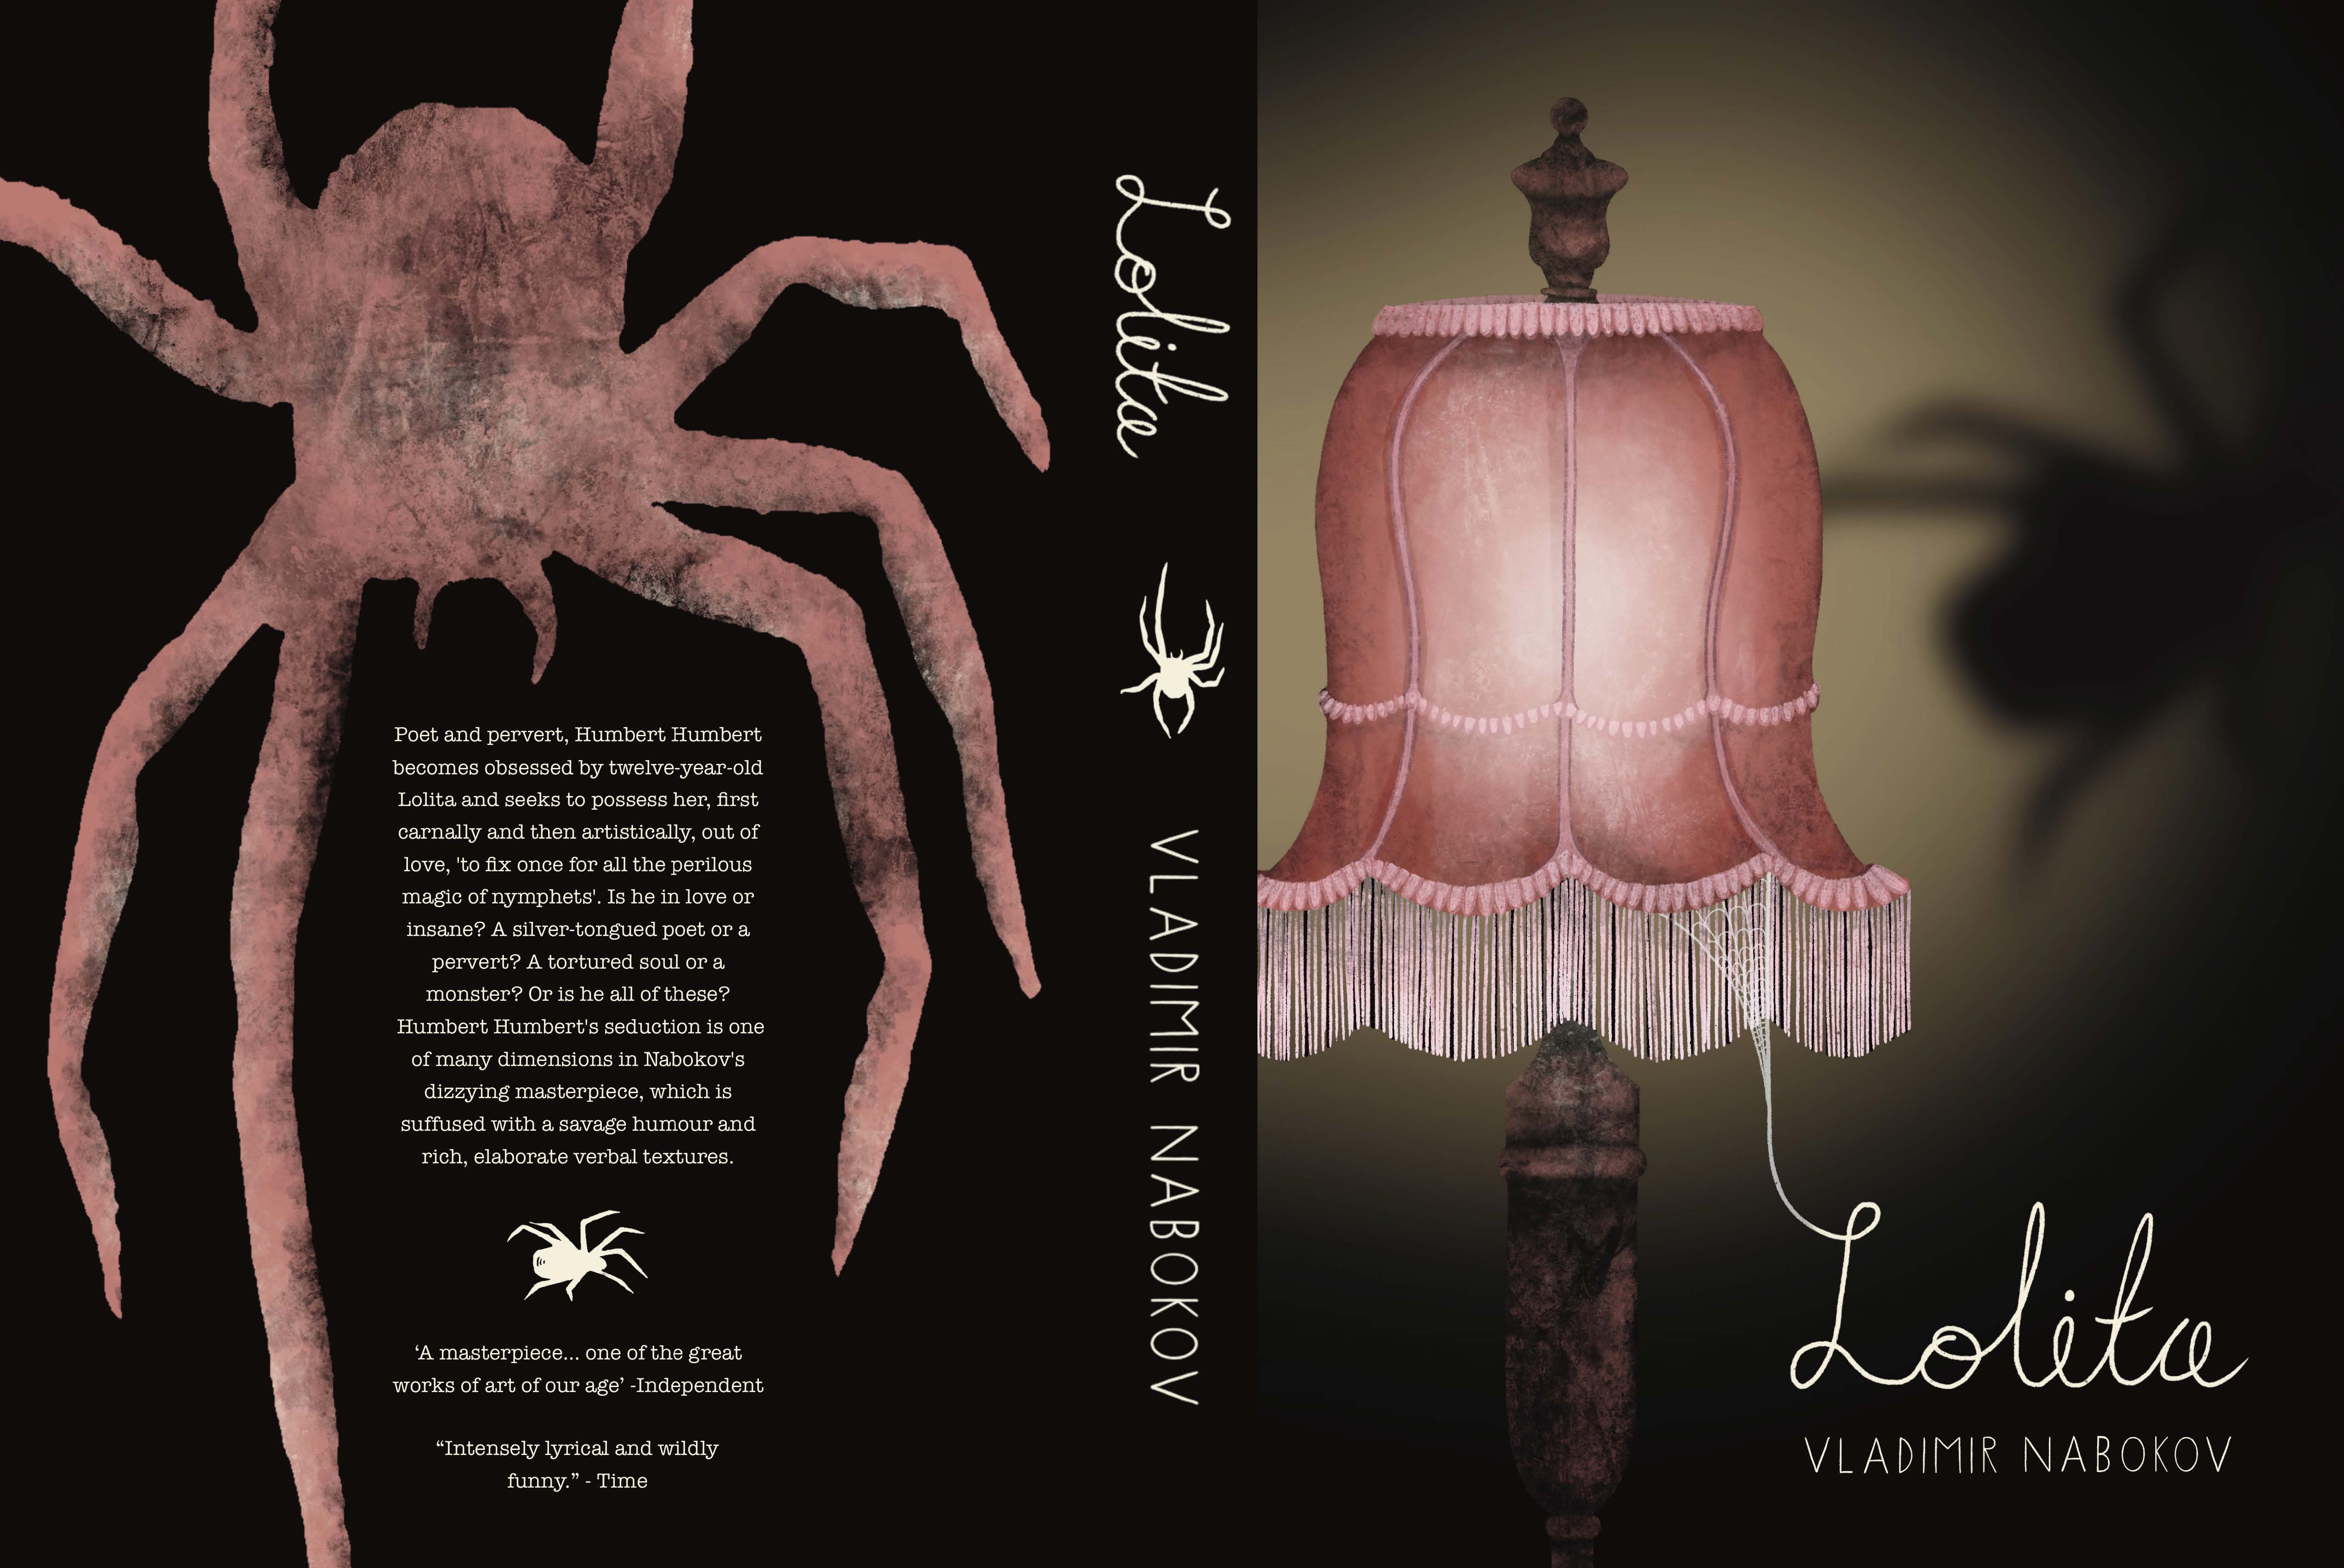 Book cover redesign of Vladimir Nabokov's, Lolita. Depicting a pink glowing lampshade, off centre, with a blurred spider silhouette, looming behind. Back cover includes a large pink textured spider shape.